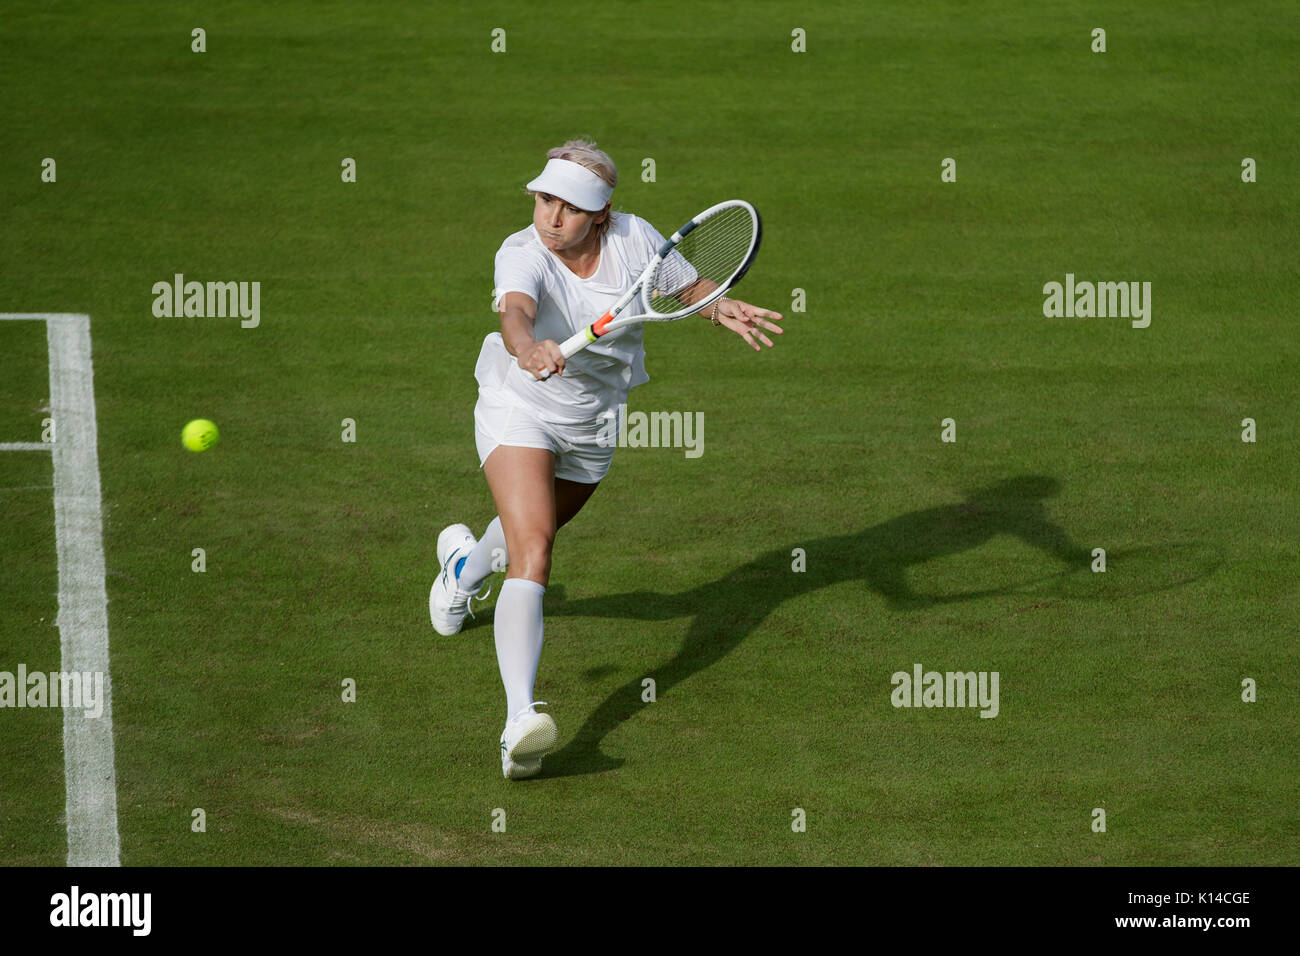 Bethanie Mattek-Sands of the USA during practice at the Wimbledon Championships 2017 Stock Photo